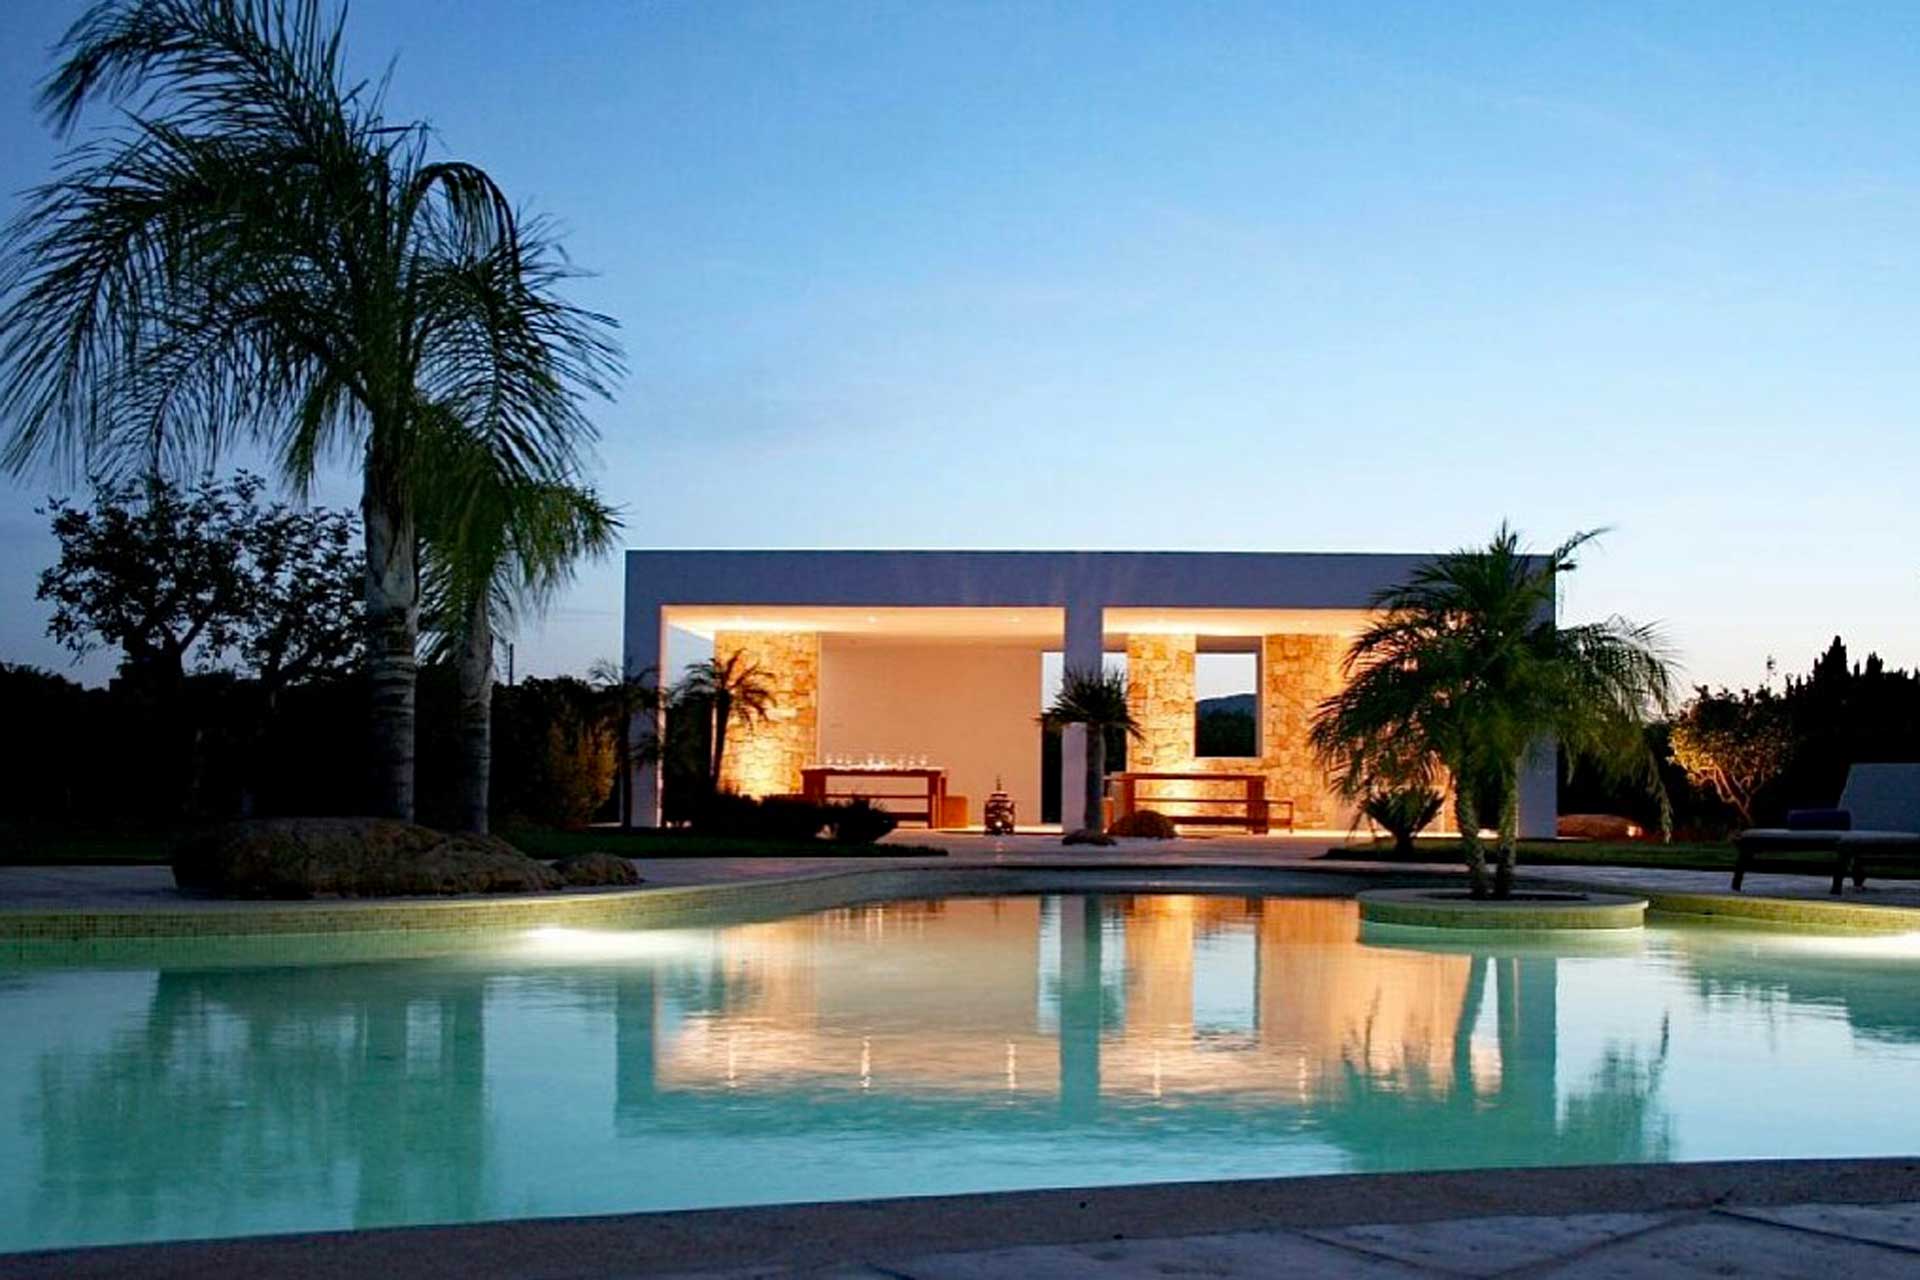 Finca Can Cos Ibiza - Pool house by night